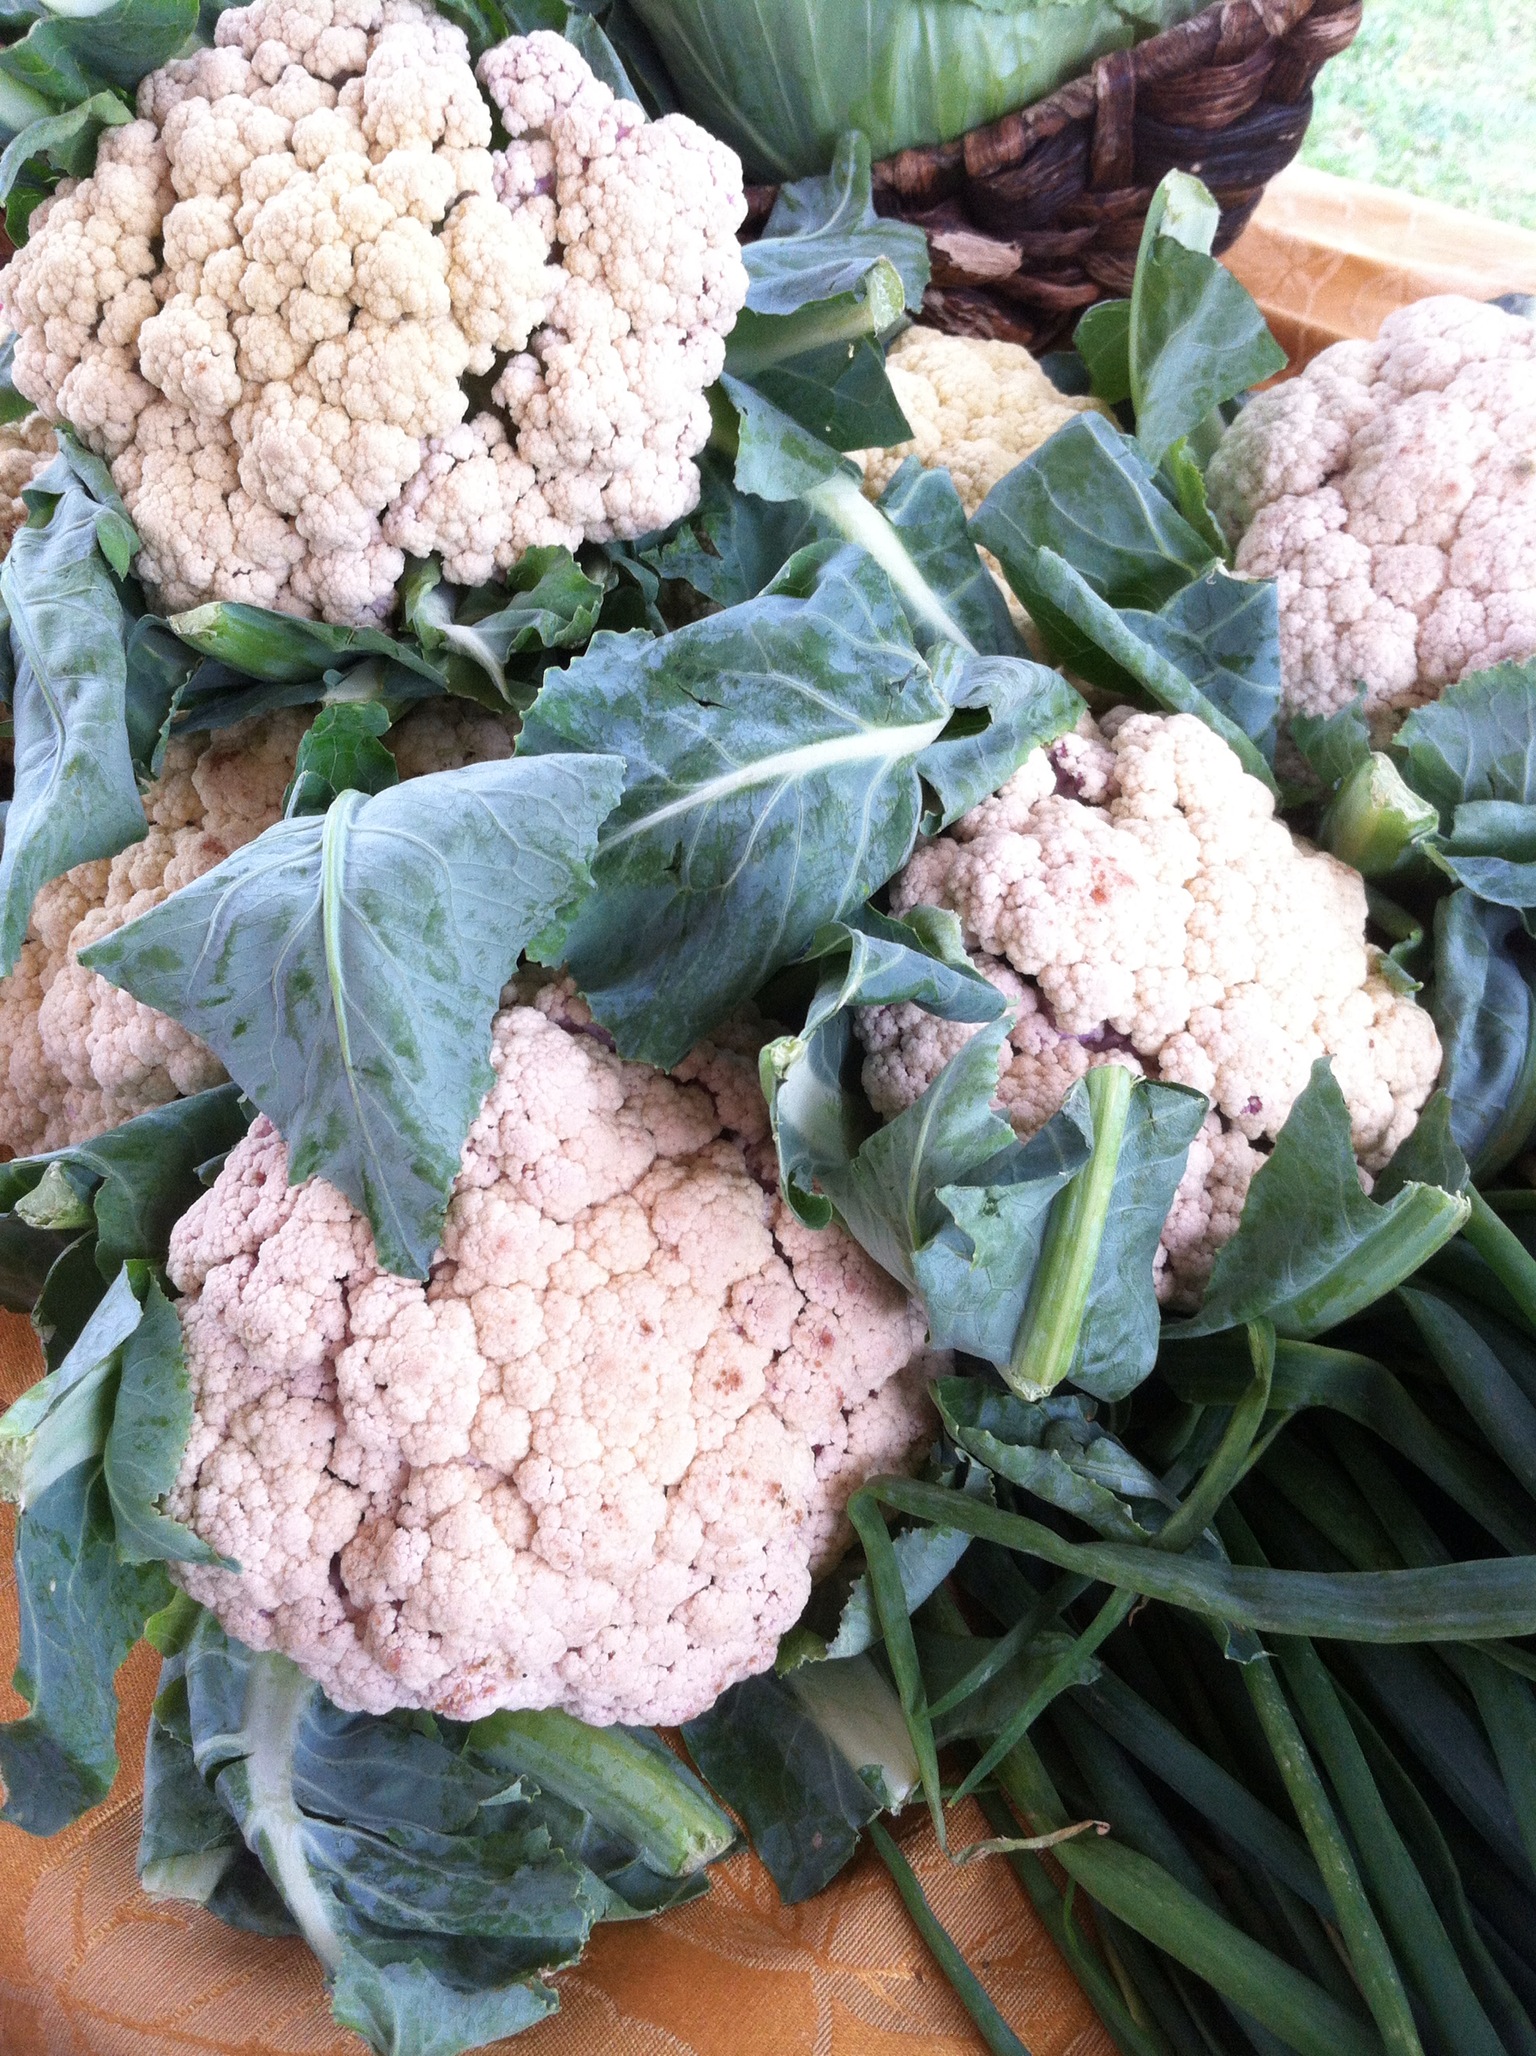 Cauliflower Is Coming In